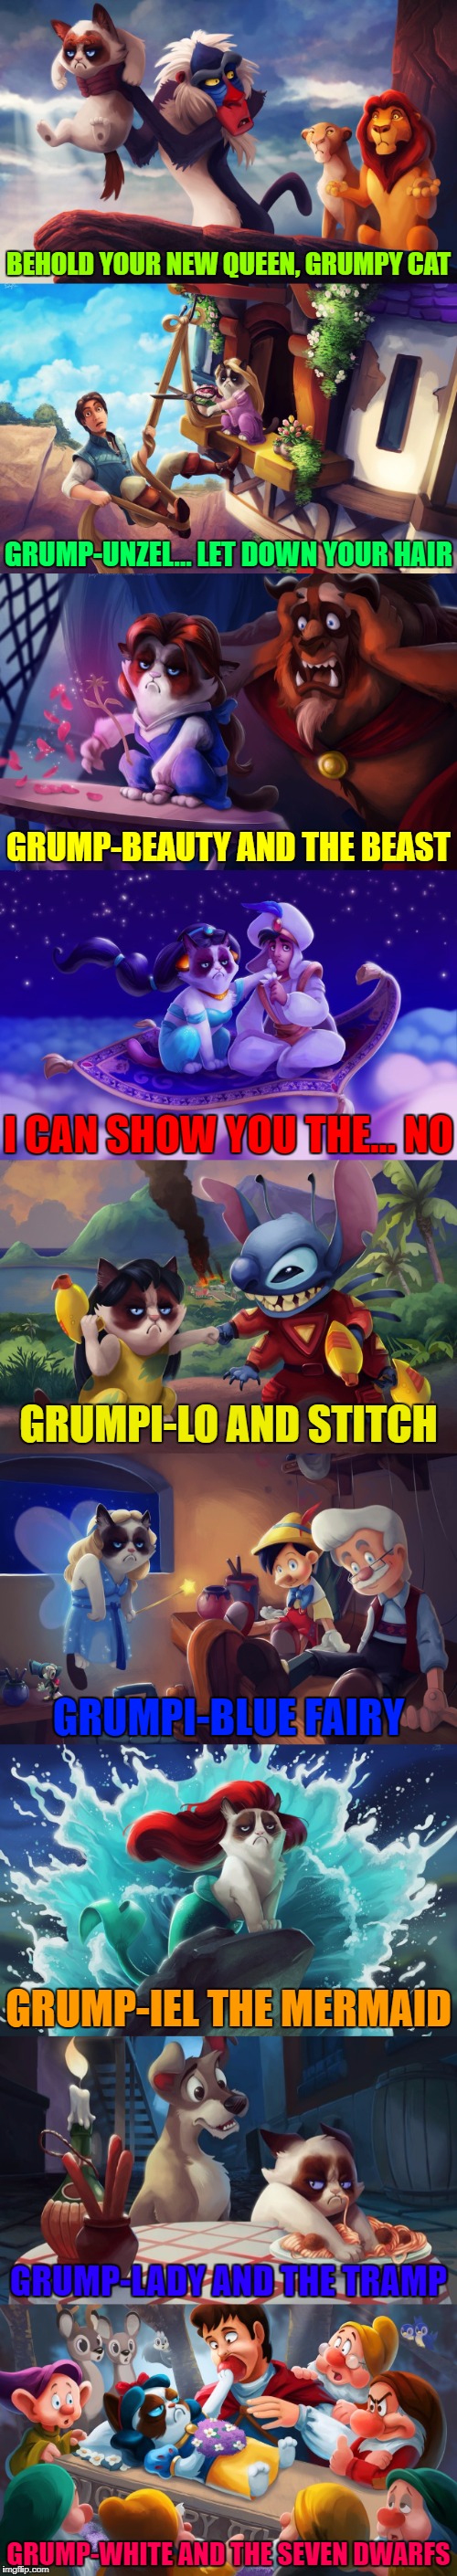 Grumpy Cat Presented By Dis-No! ≧^◡^≦ | BEHOLD YOUR NEW QUEEN, GRUMPY CAT; GRUMP-UNZEL... LET DOWN YOUR HAIR; GRUMP-BEAUTY AND THE BEAST; I CAN SHOW YOU THE... NO; GRUMPI-LO AND STITCH; GRUMPI-BLUE FAIRY; GRUMP-IEL THE MERMAID; GRUMP-LADY AND THE TRAMP; GRUMP-WHITE AND THE SEVEN DWARFS | image tagged in memes,grumpy cat disney,tsaoshin deviant art creation,google images,disney,craziness_all_the_way | made w/ Imgflip meme maker